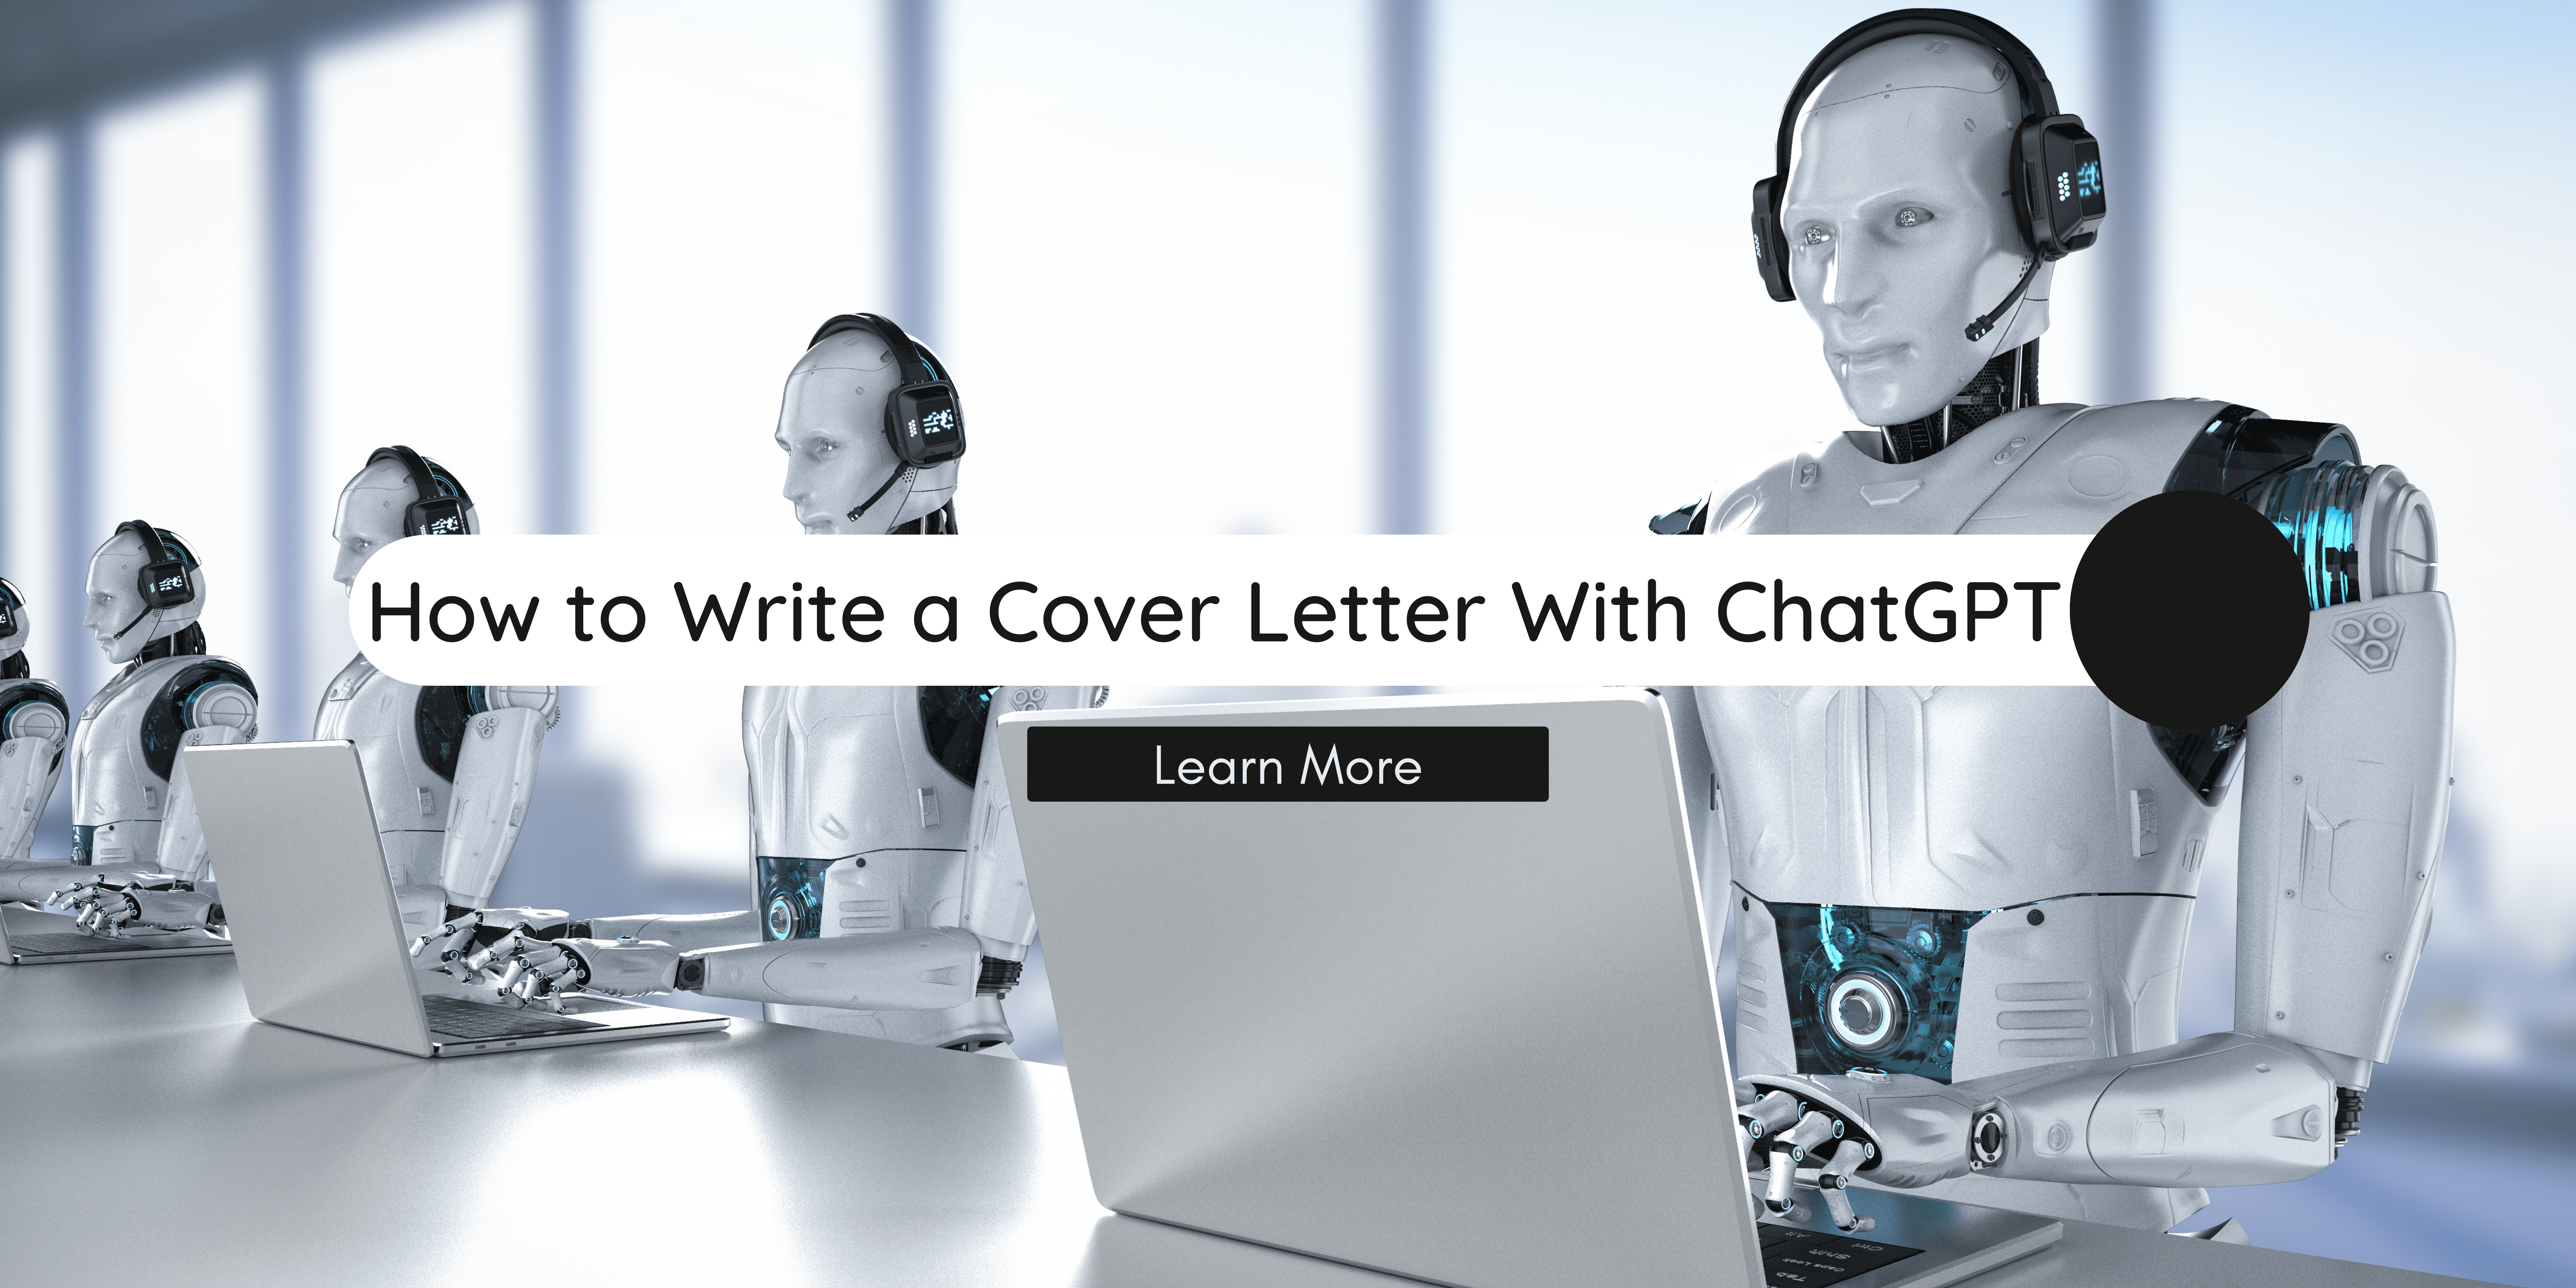 How to Write a Cover Letter With ChatGPT